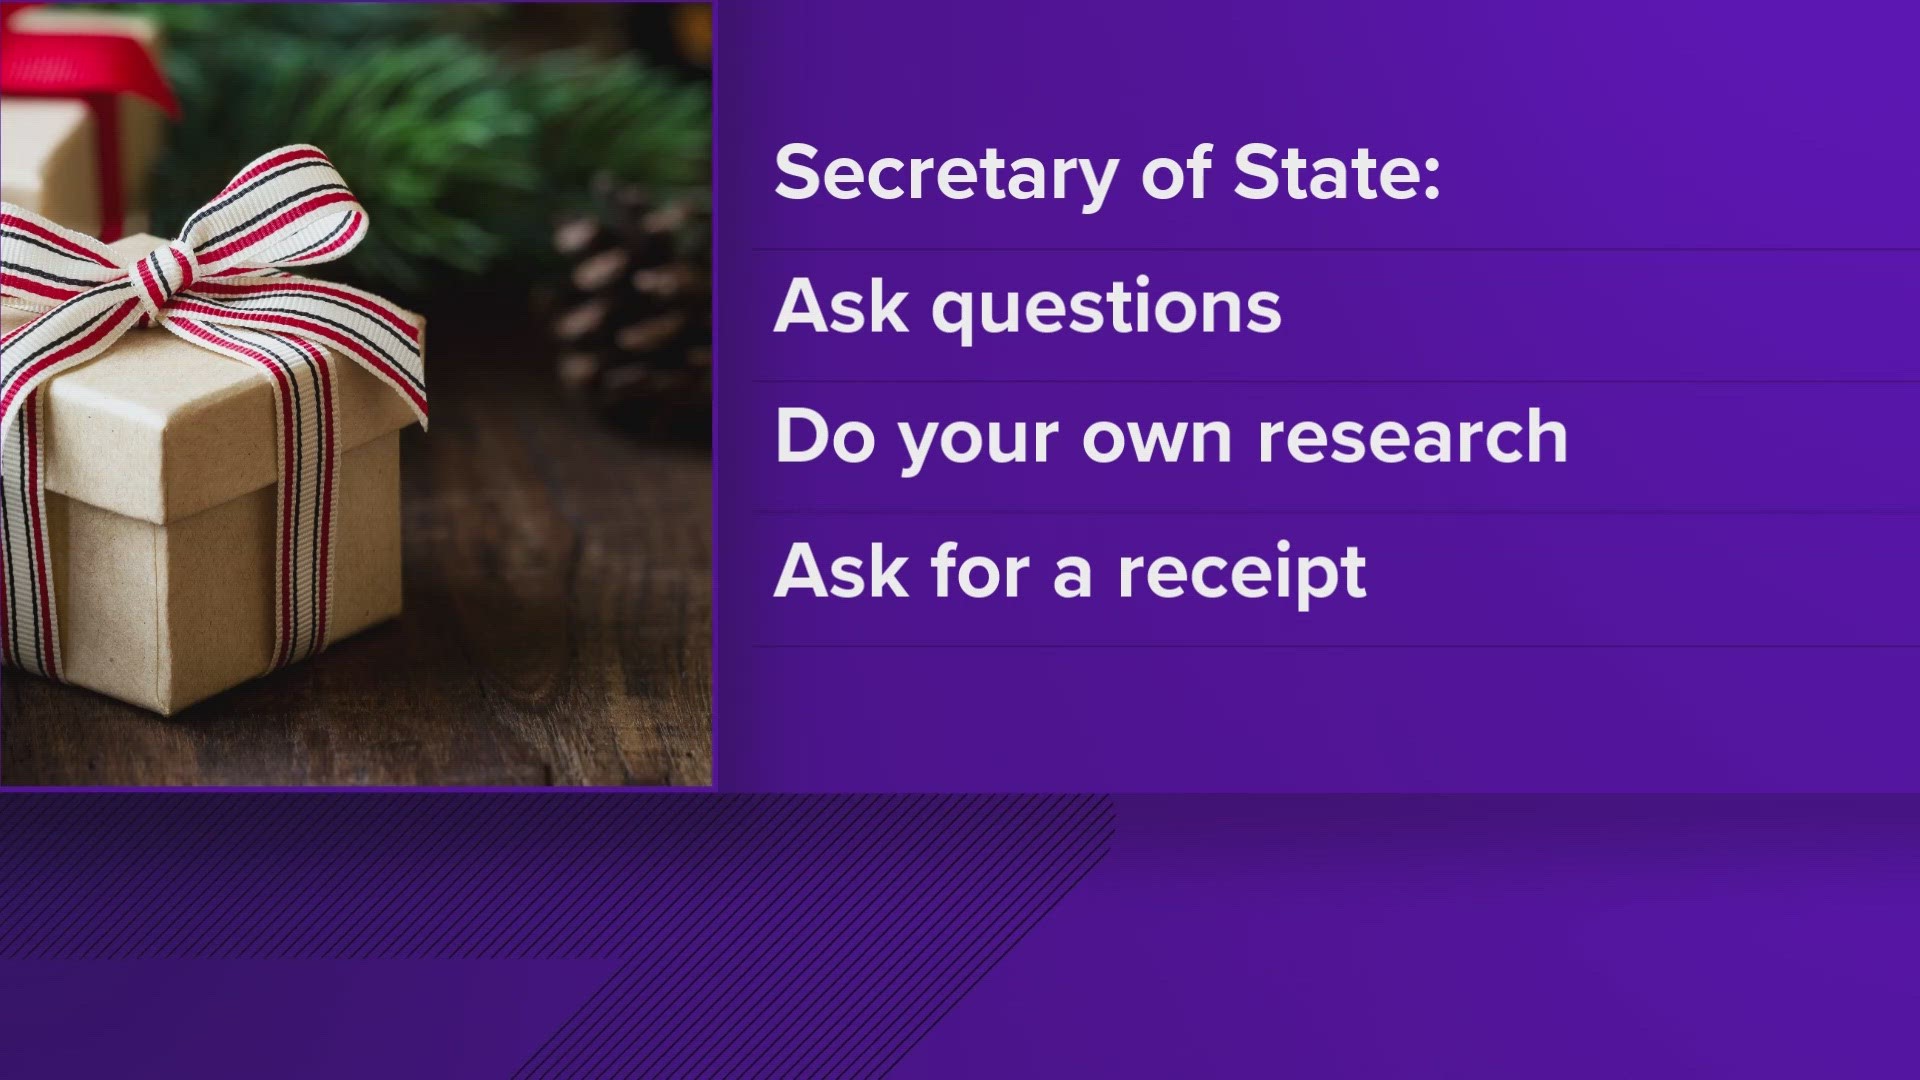 According to Tre Hargett, the Tennessee Secretary of State, donors should make sure nonprofits are registered with the state before giving them money.